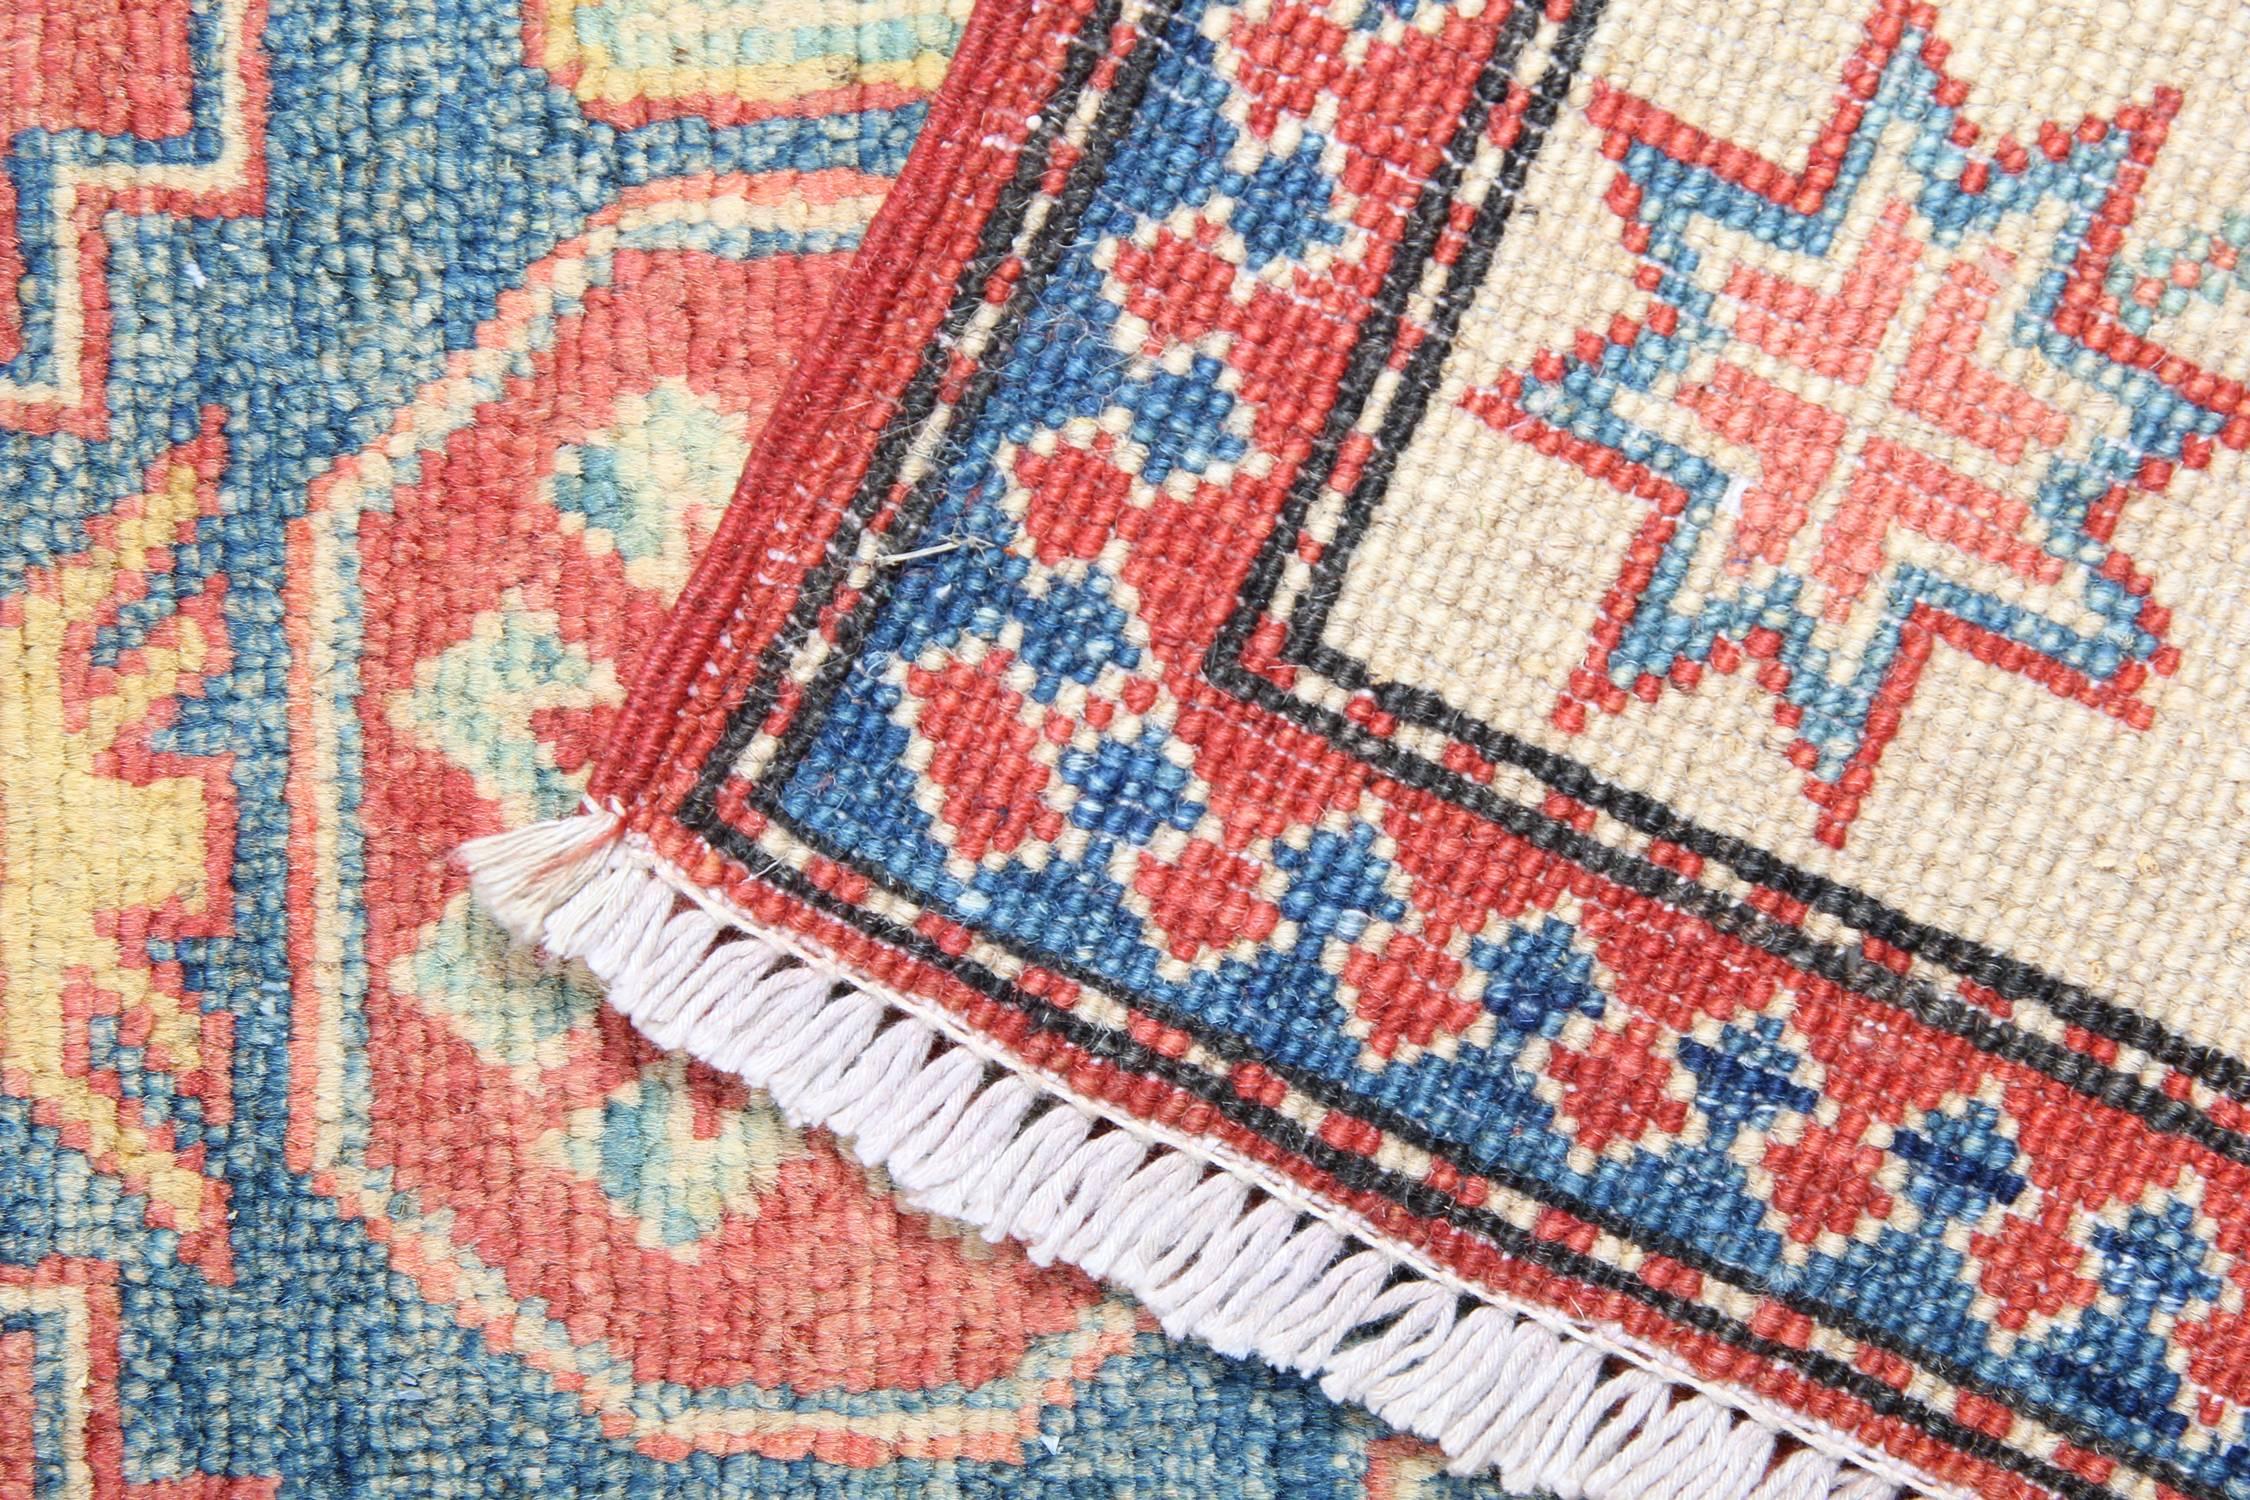 Hand-Crafted New Carpet Runners, Large Rugs, Kazak Runner Rugs, Carpet from Afghanistan